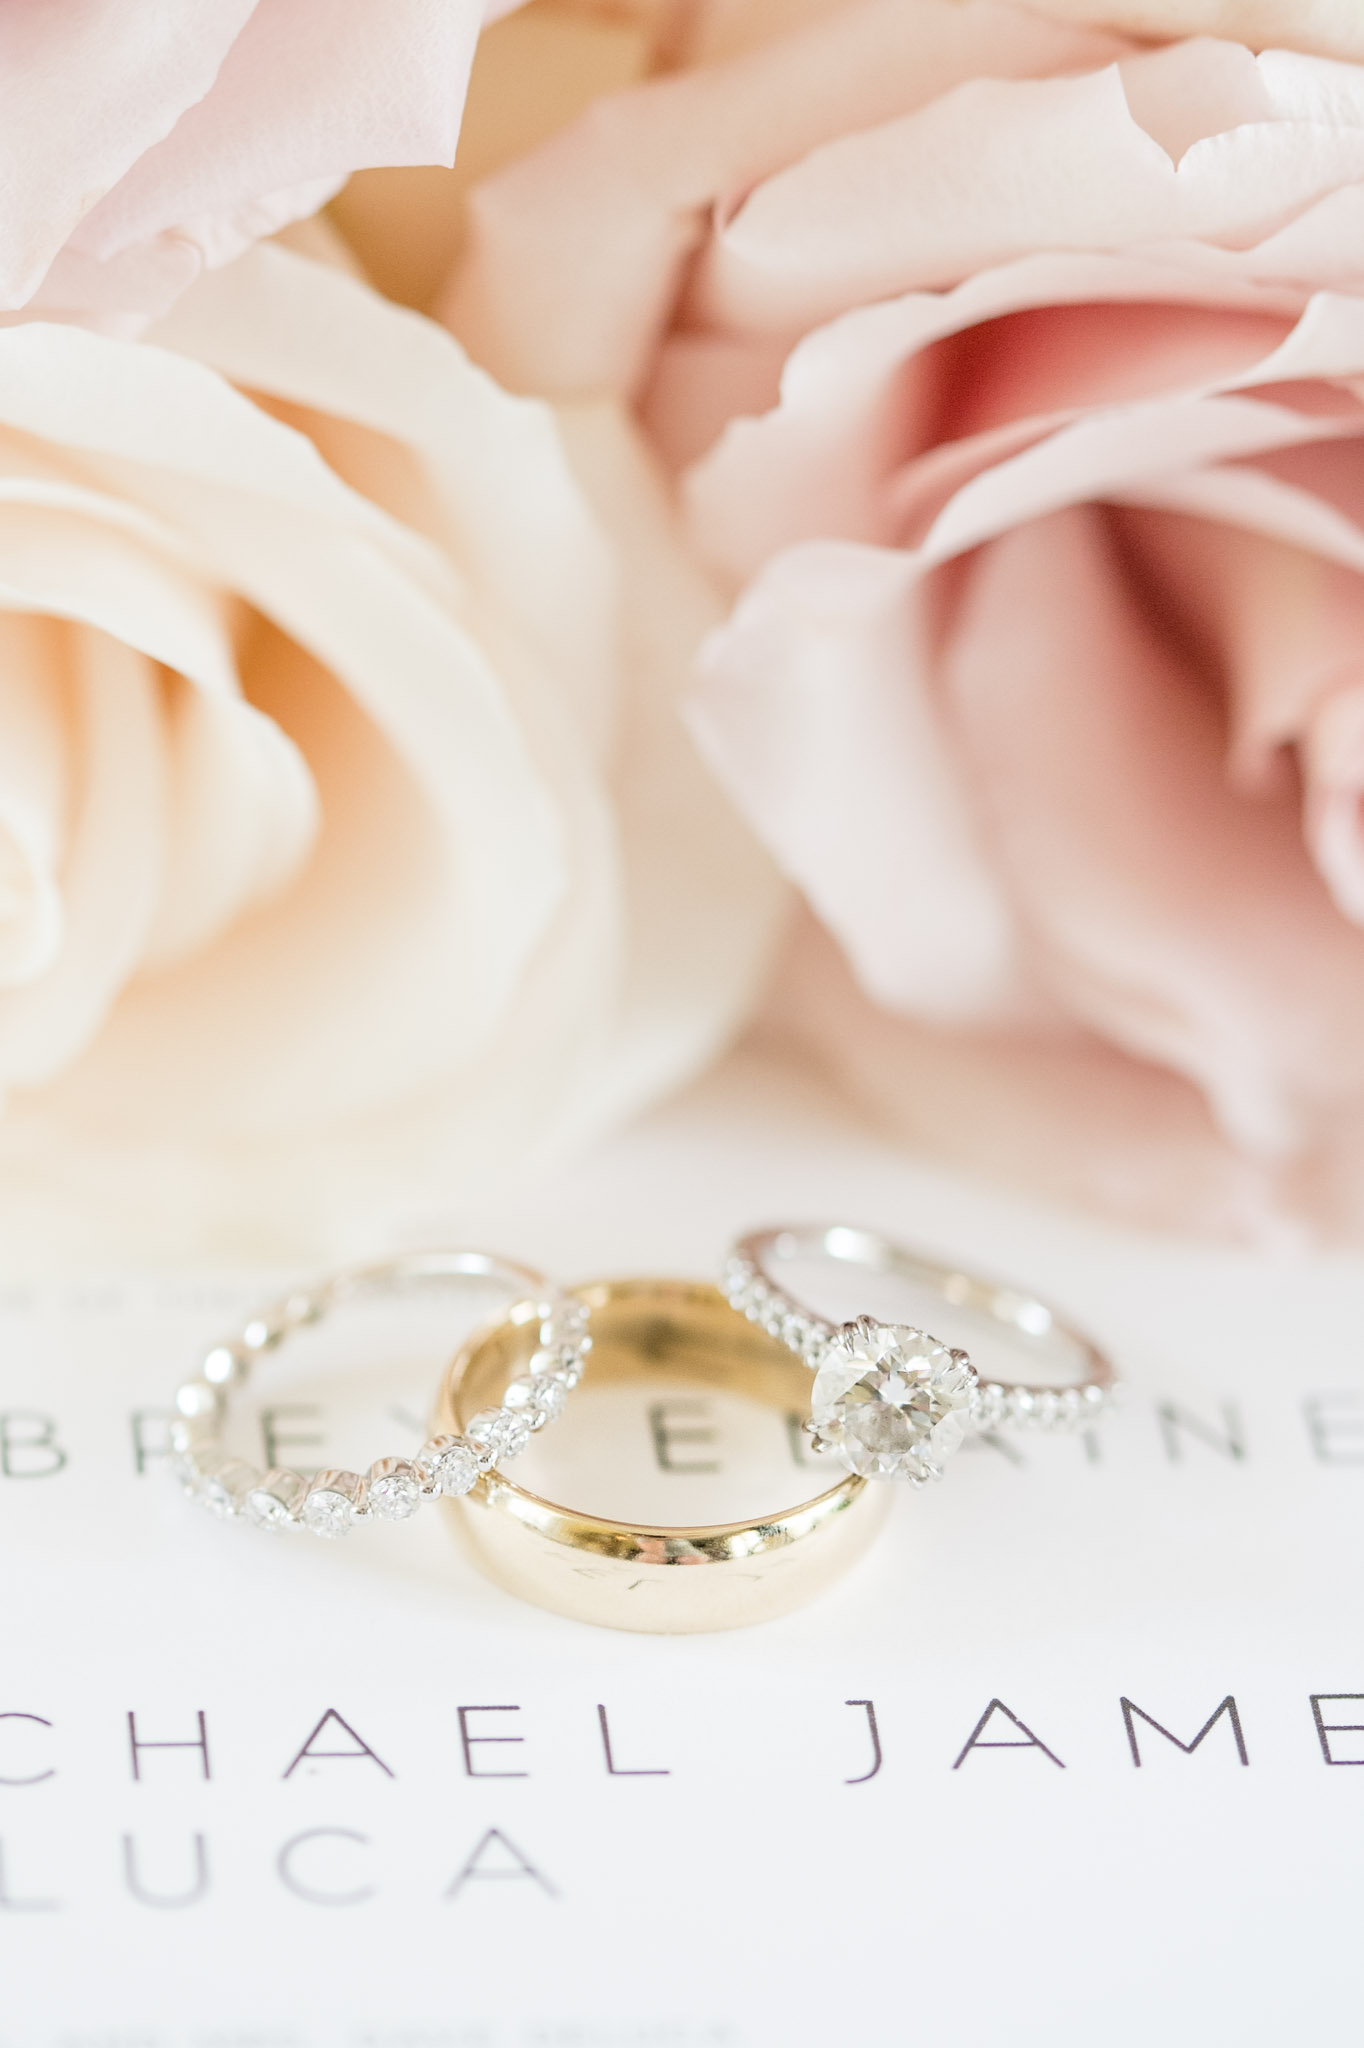 Bride and groom wedding rings with flowers and invitations.